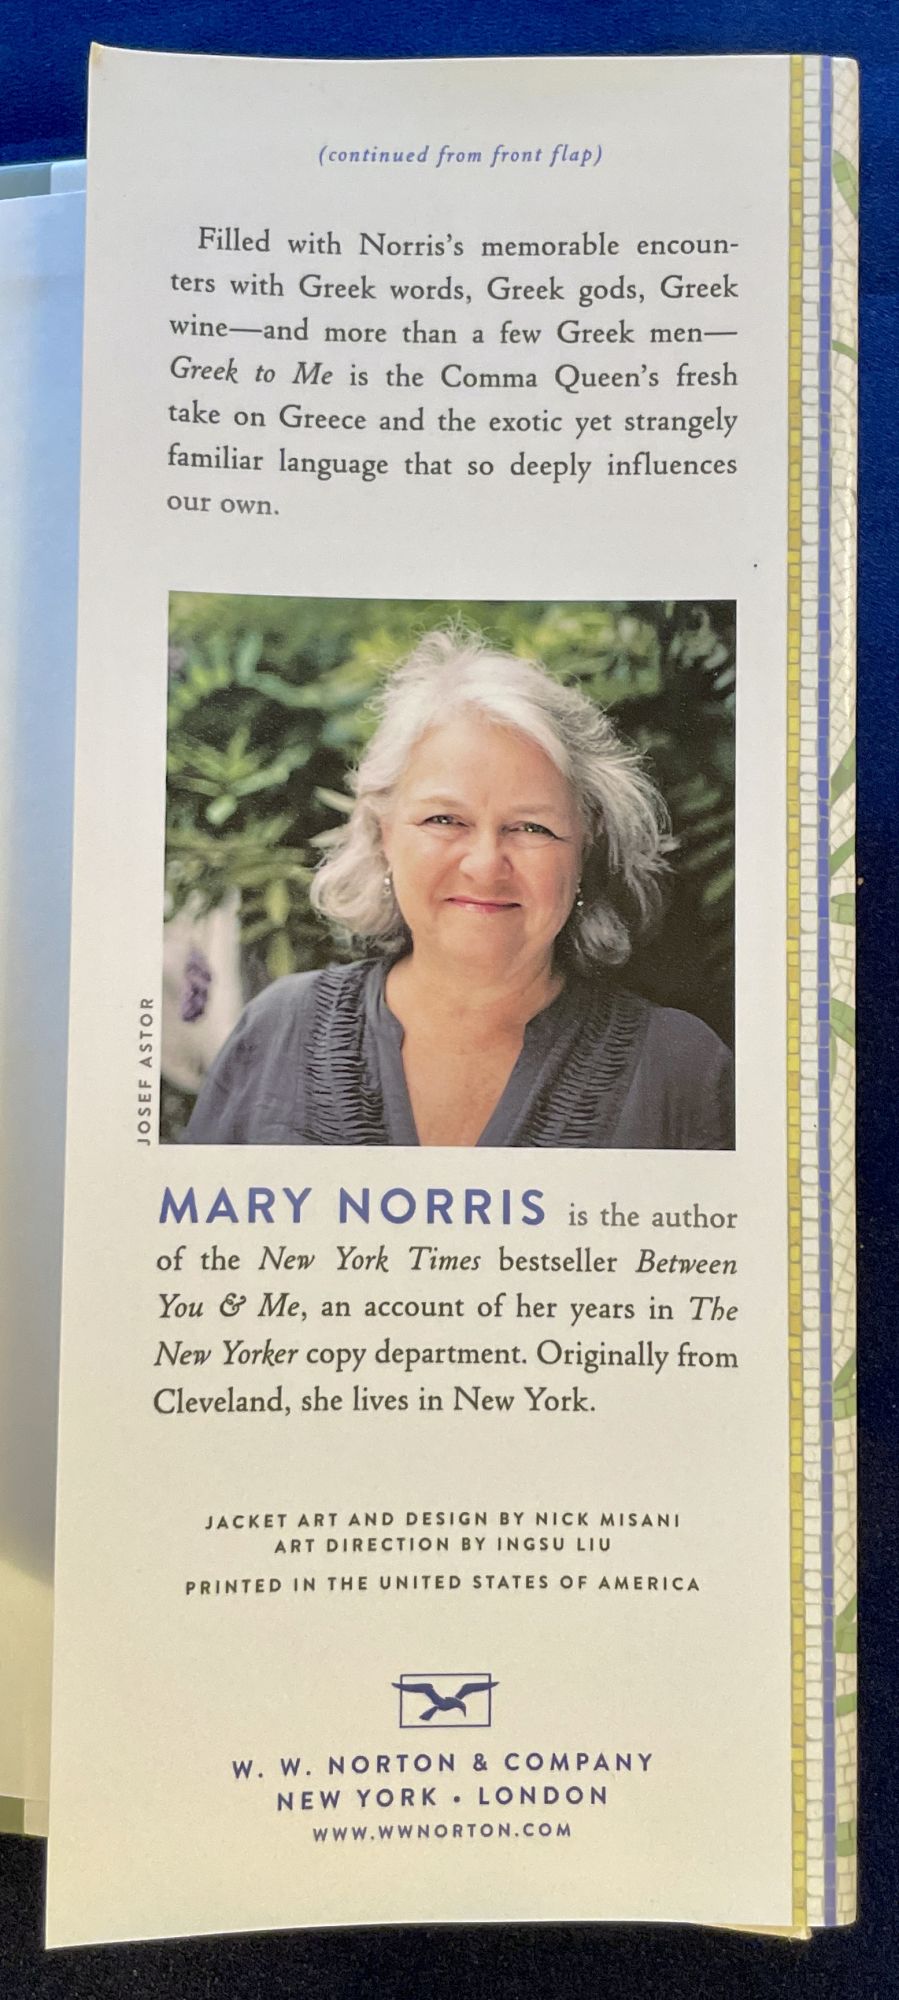 Greek to Me, by Mary Norris